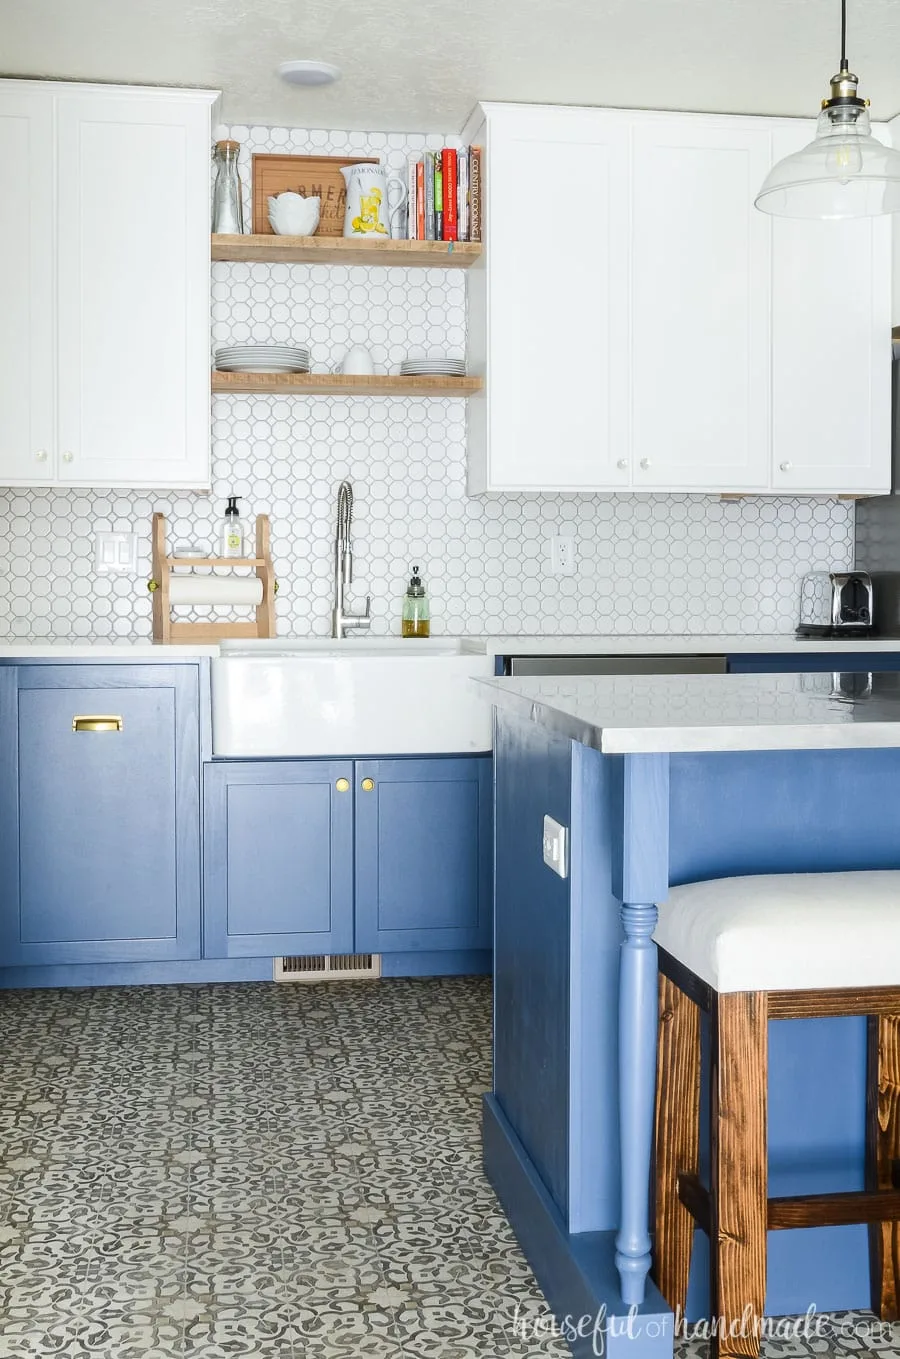 Two tone kitchen with white upper cabinets and blue base cabinets. Apron front kitchen sink with rustic open shelving. Patterned vinyl flooring.